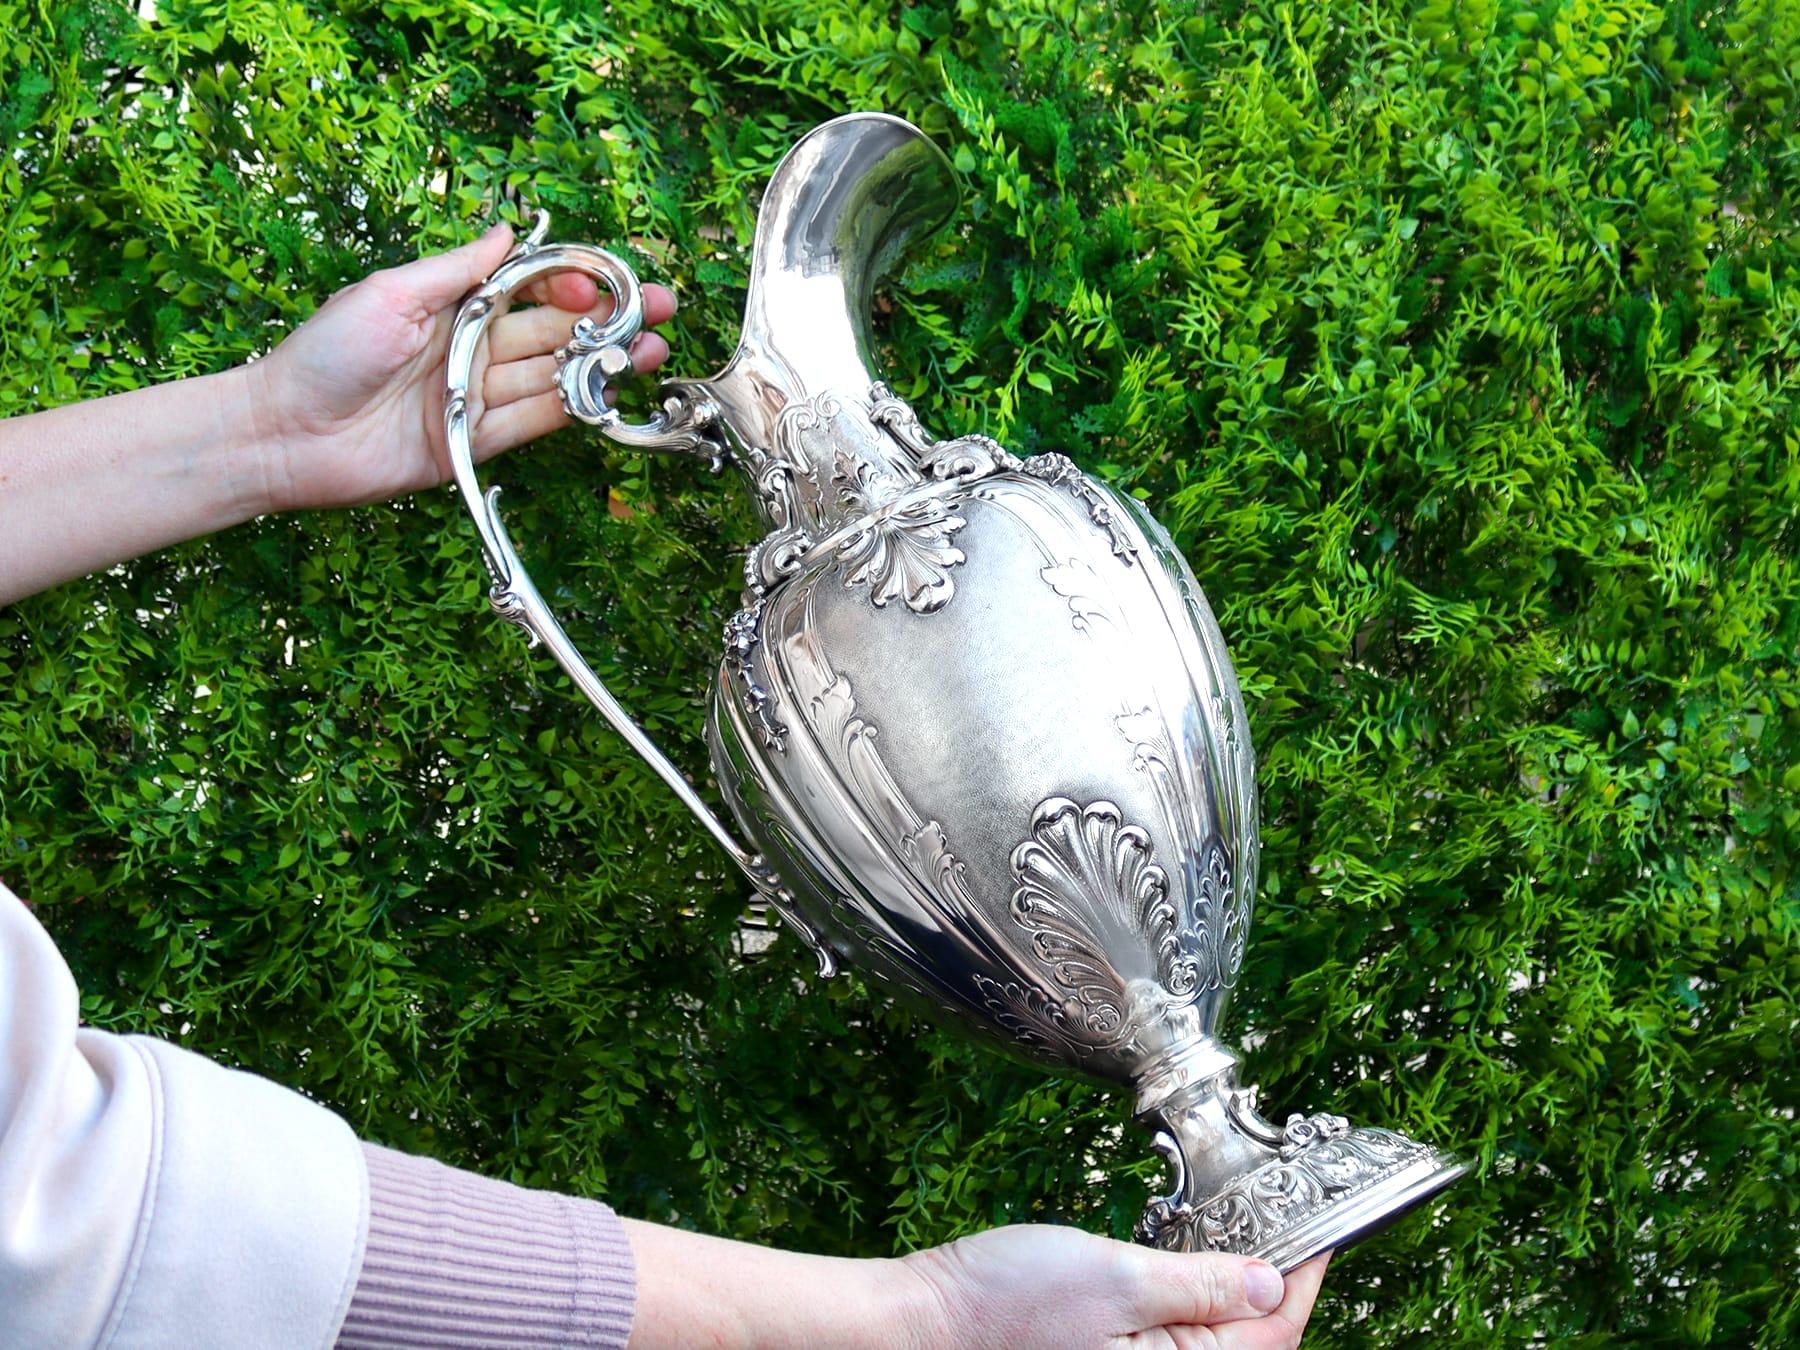 An exceptional, fine and impressive, large vintage Italian silver wine ewer and presentation plate, part of our wine and drinks related silverware collection.

This exceptional and large antique Italian silver ewer has a rounded ovoid shaped form